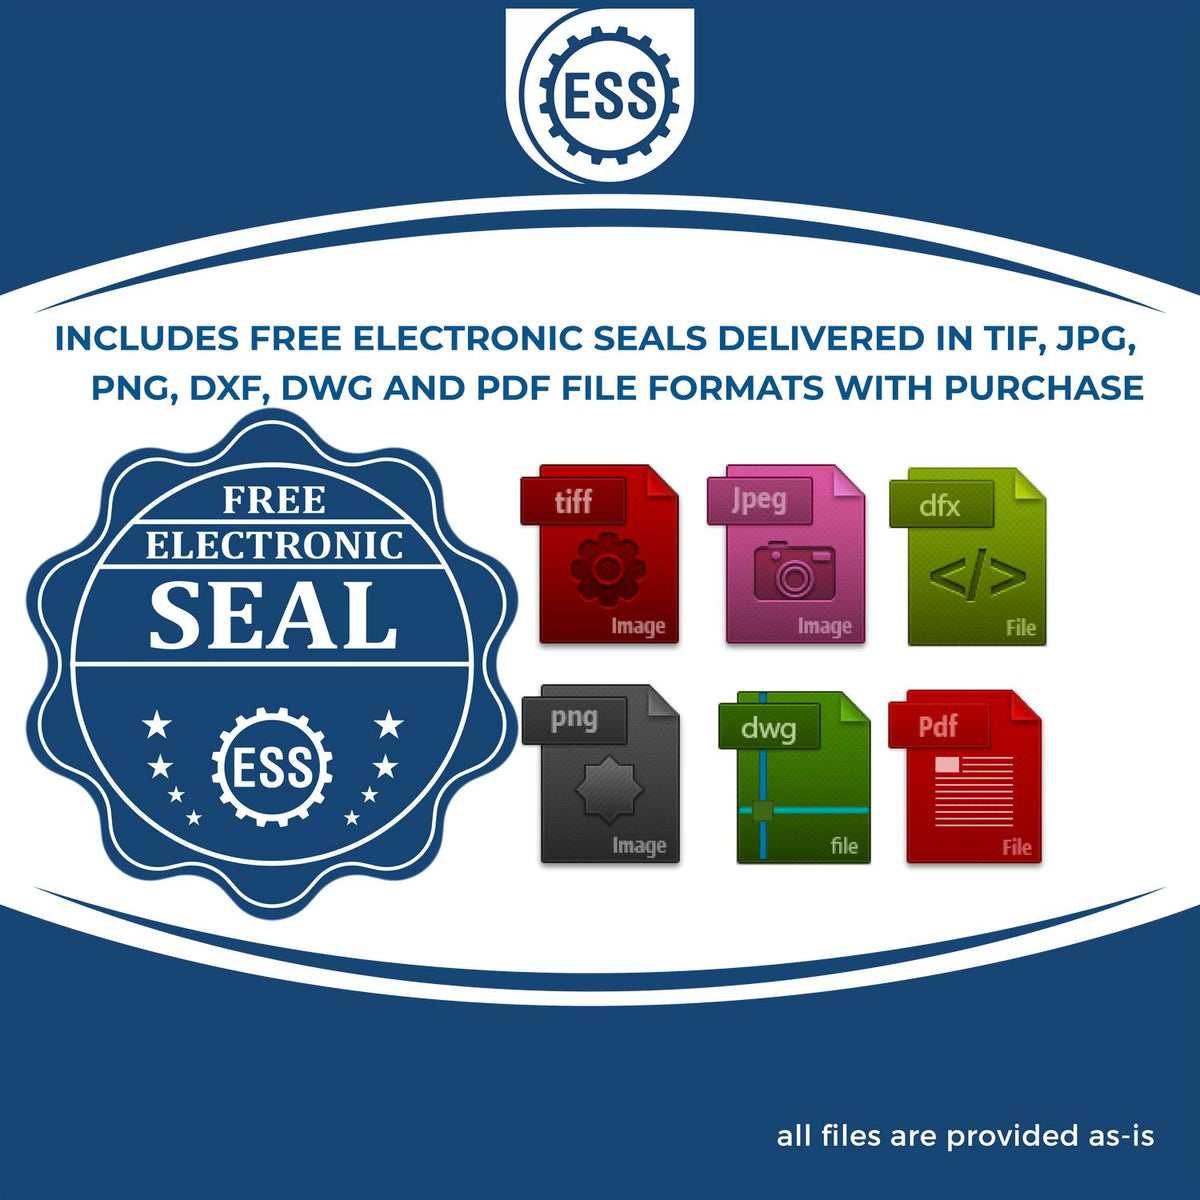 An infographic for the free electronic seal for the Heavy Duty Cast Iron Arkansas Geologist Seal Embosser illustrating the different file type icons such as DXF, DWG, TIF, JPG and PNG.